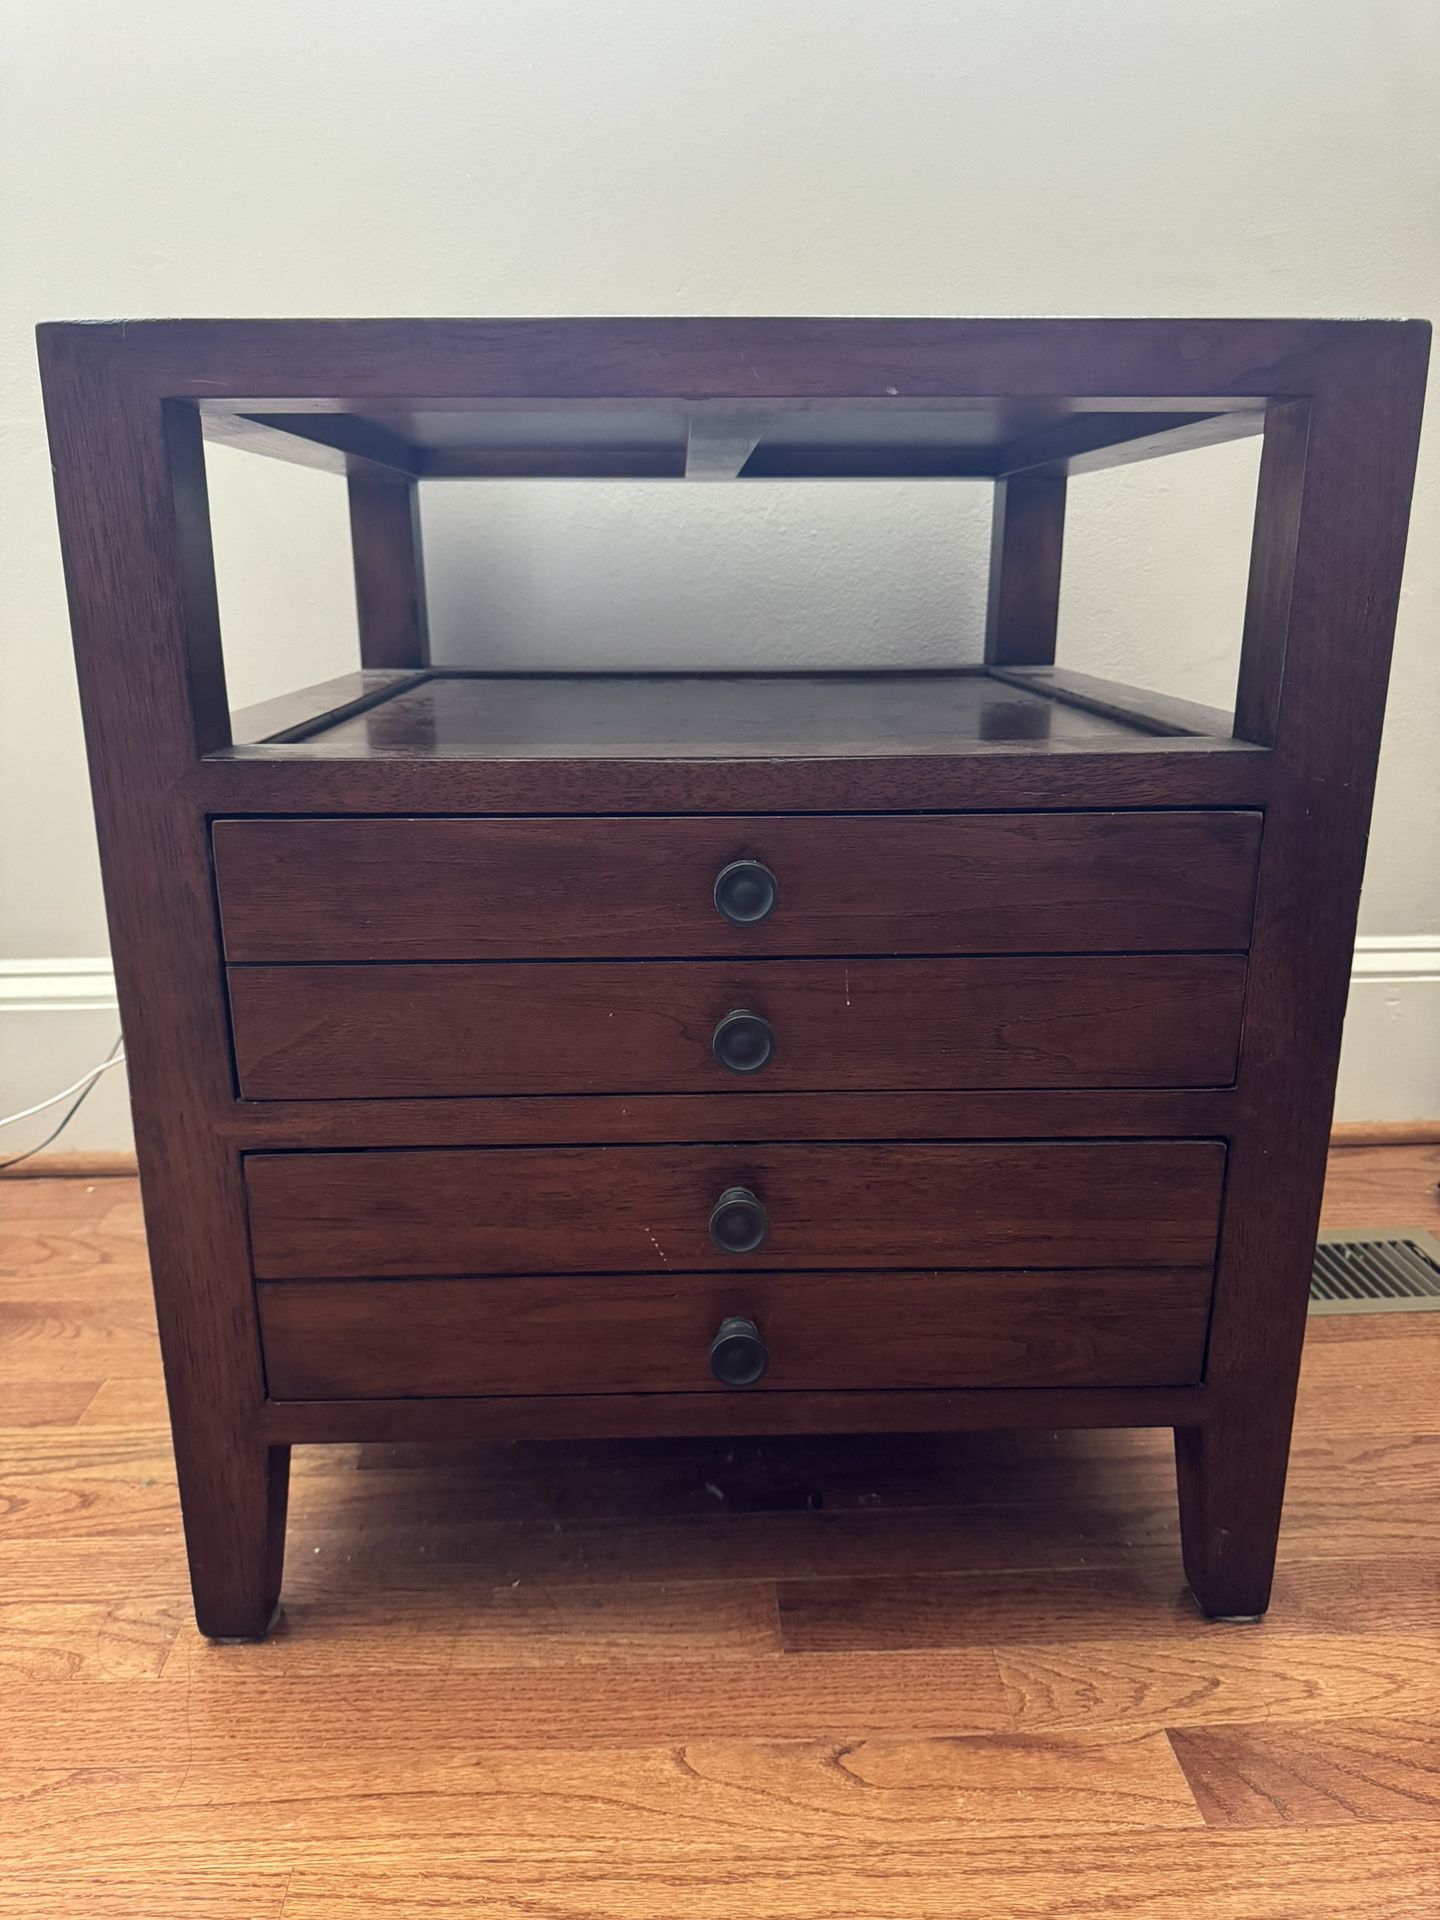 All Wood Brown Bedside Table - Nightstand